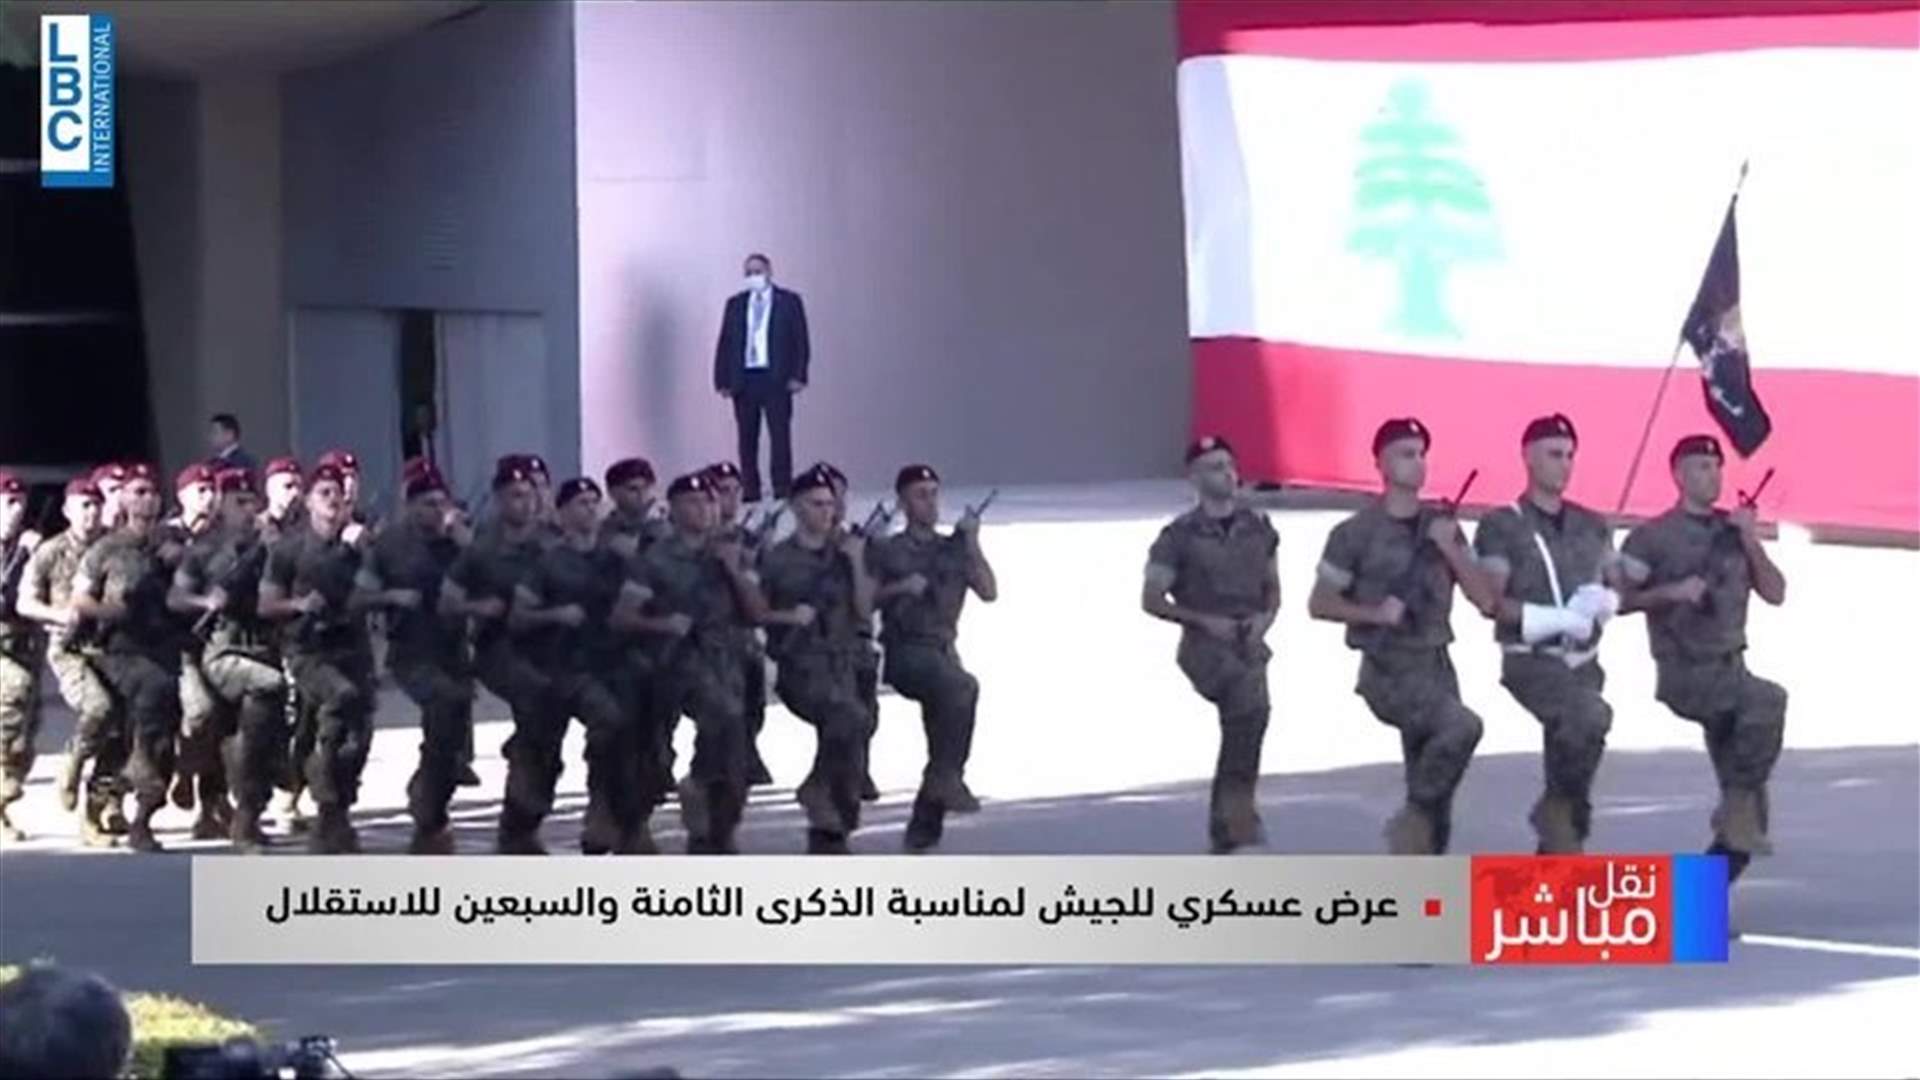 Lebanon marks Independence Day with a military parade [VIDEO] Lebanon